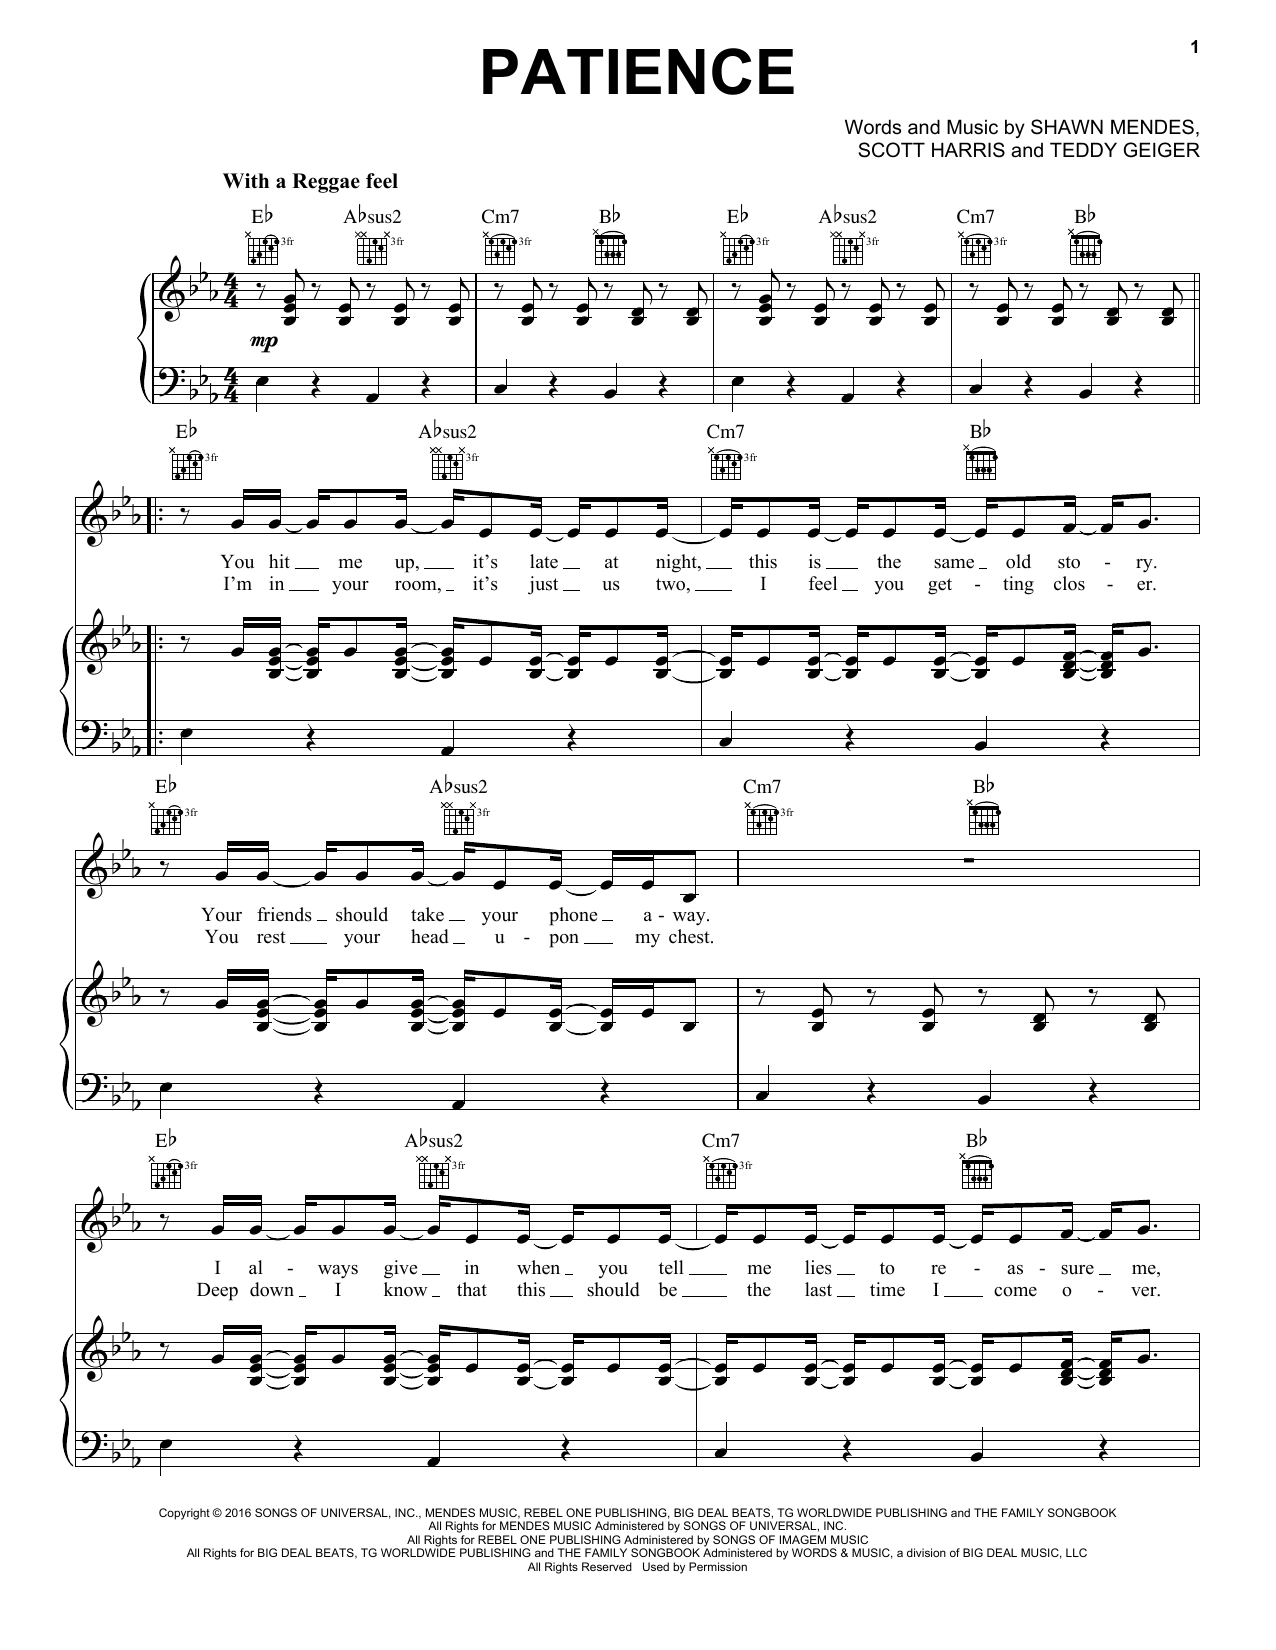 Download Shawn Mendes Patience Sheet Music